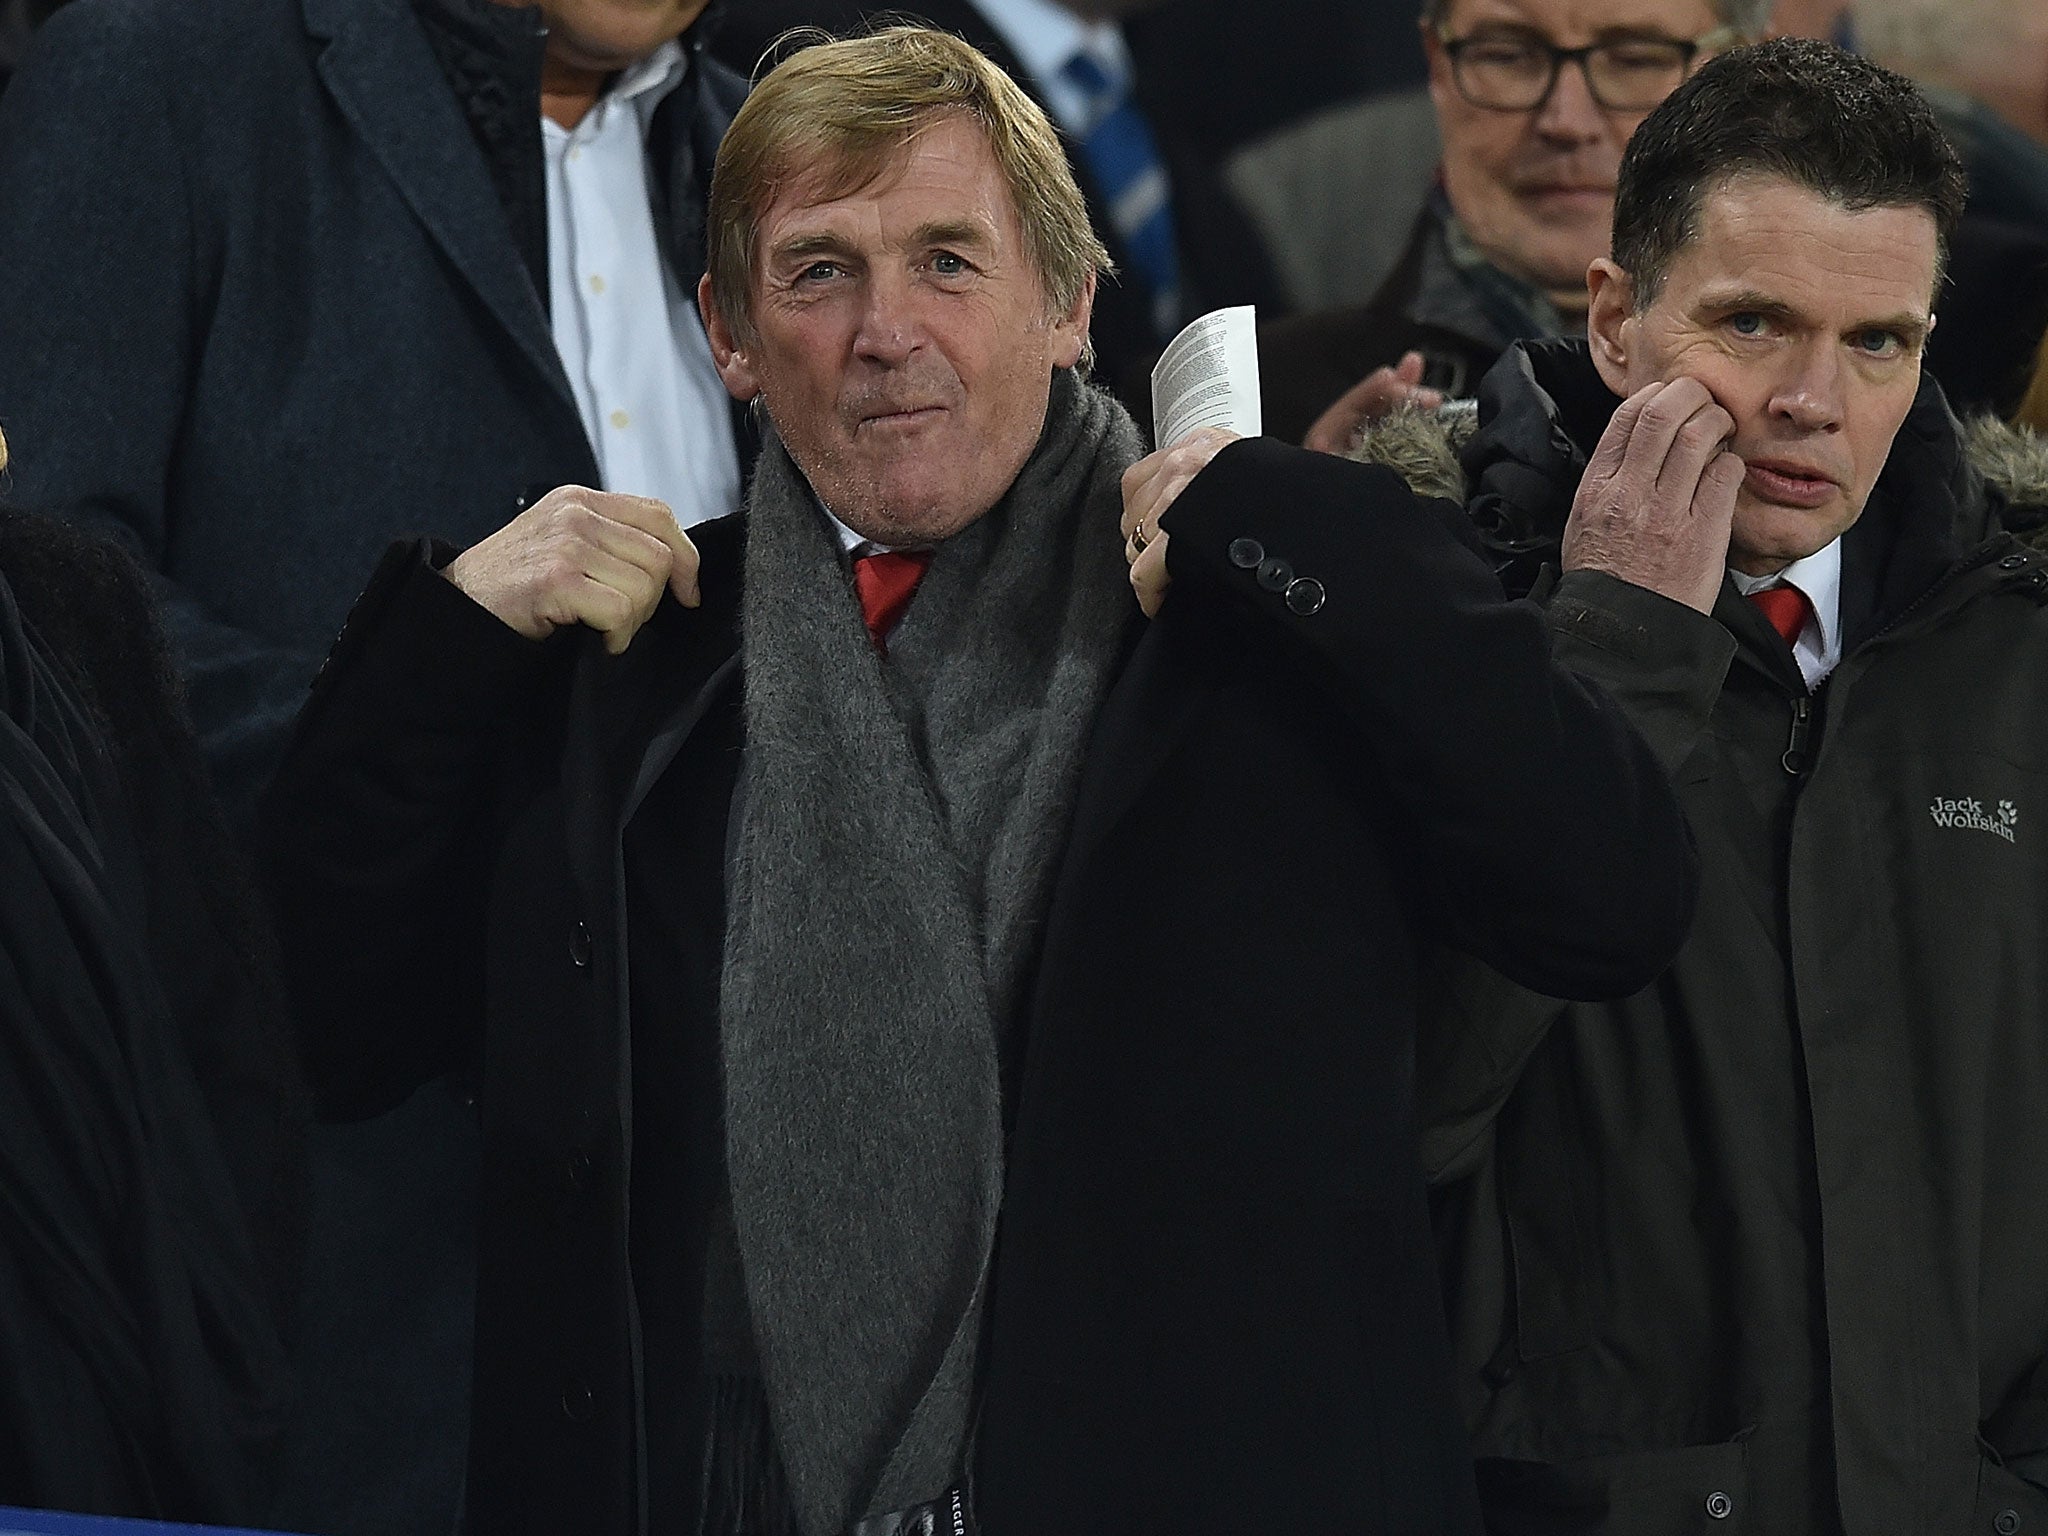 Kenny Dalglish will be honoured by Liverpool by having the Centenary Stand named after him